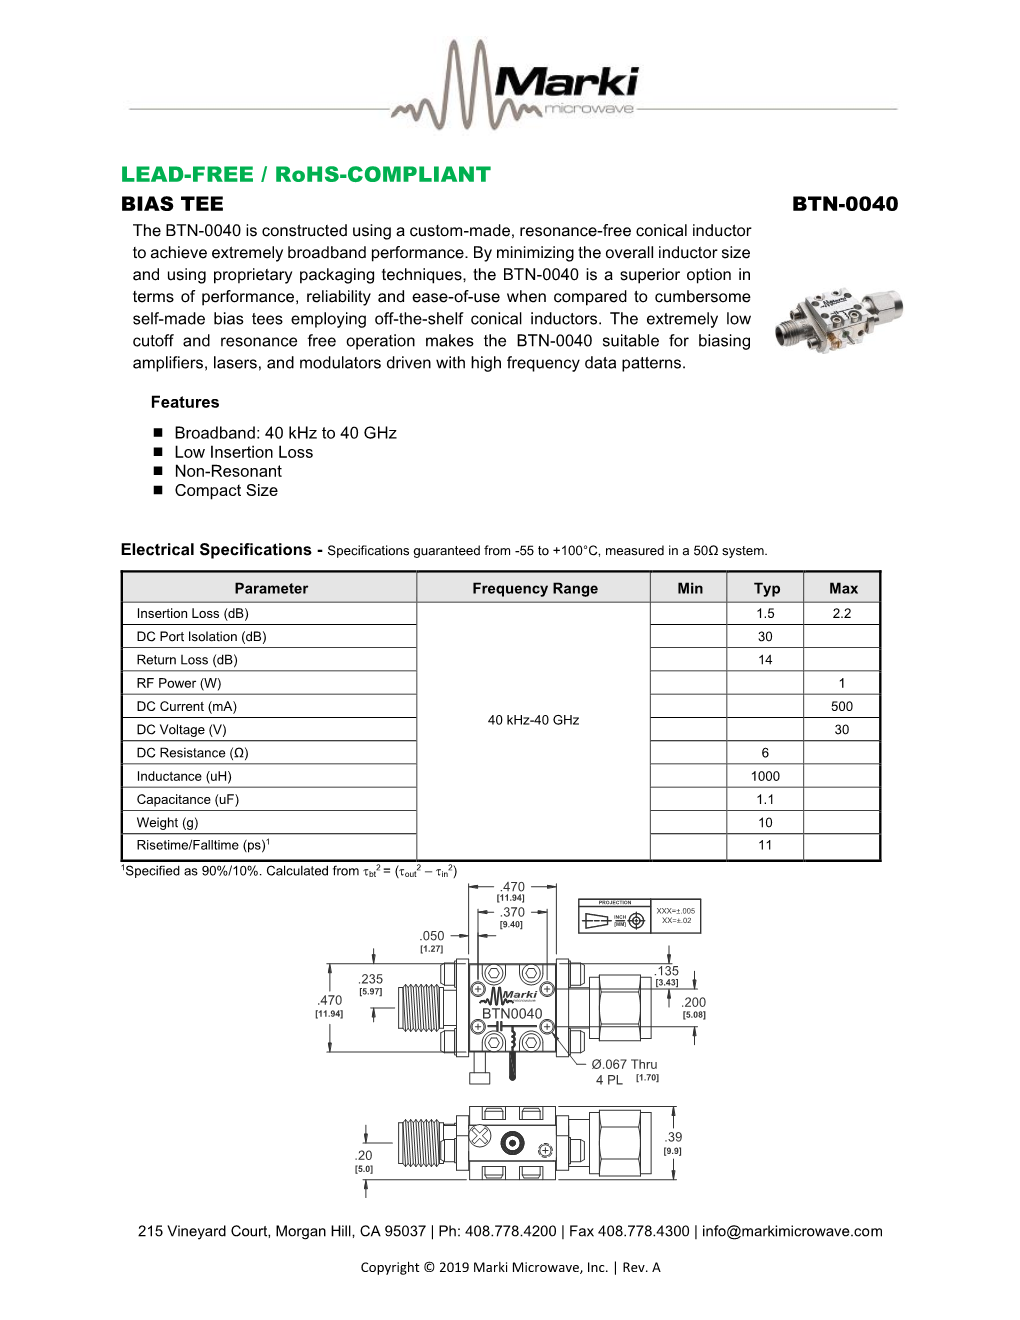 BTN-0040 the BTN-0040 Is Constructed Using a Custom-Made, Resonance-Free Conical Inductor to Achieve Extremely Broadband Performance